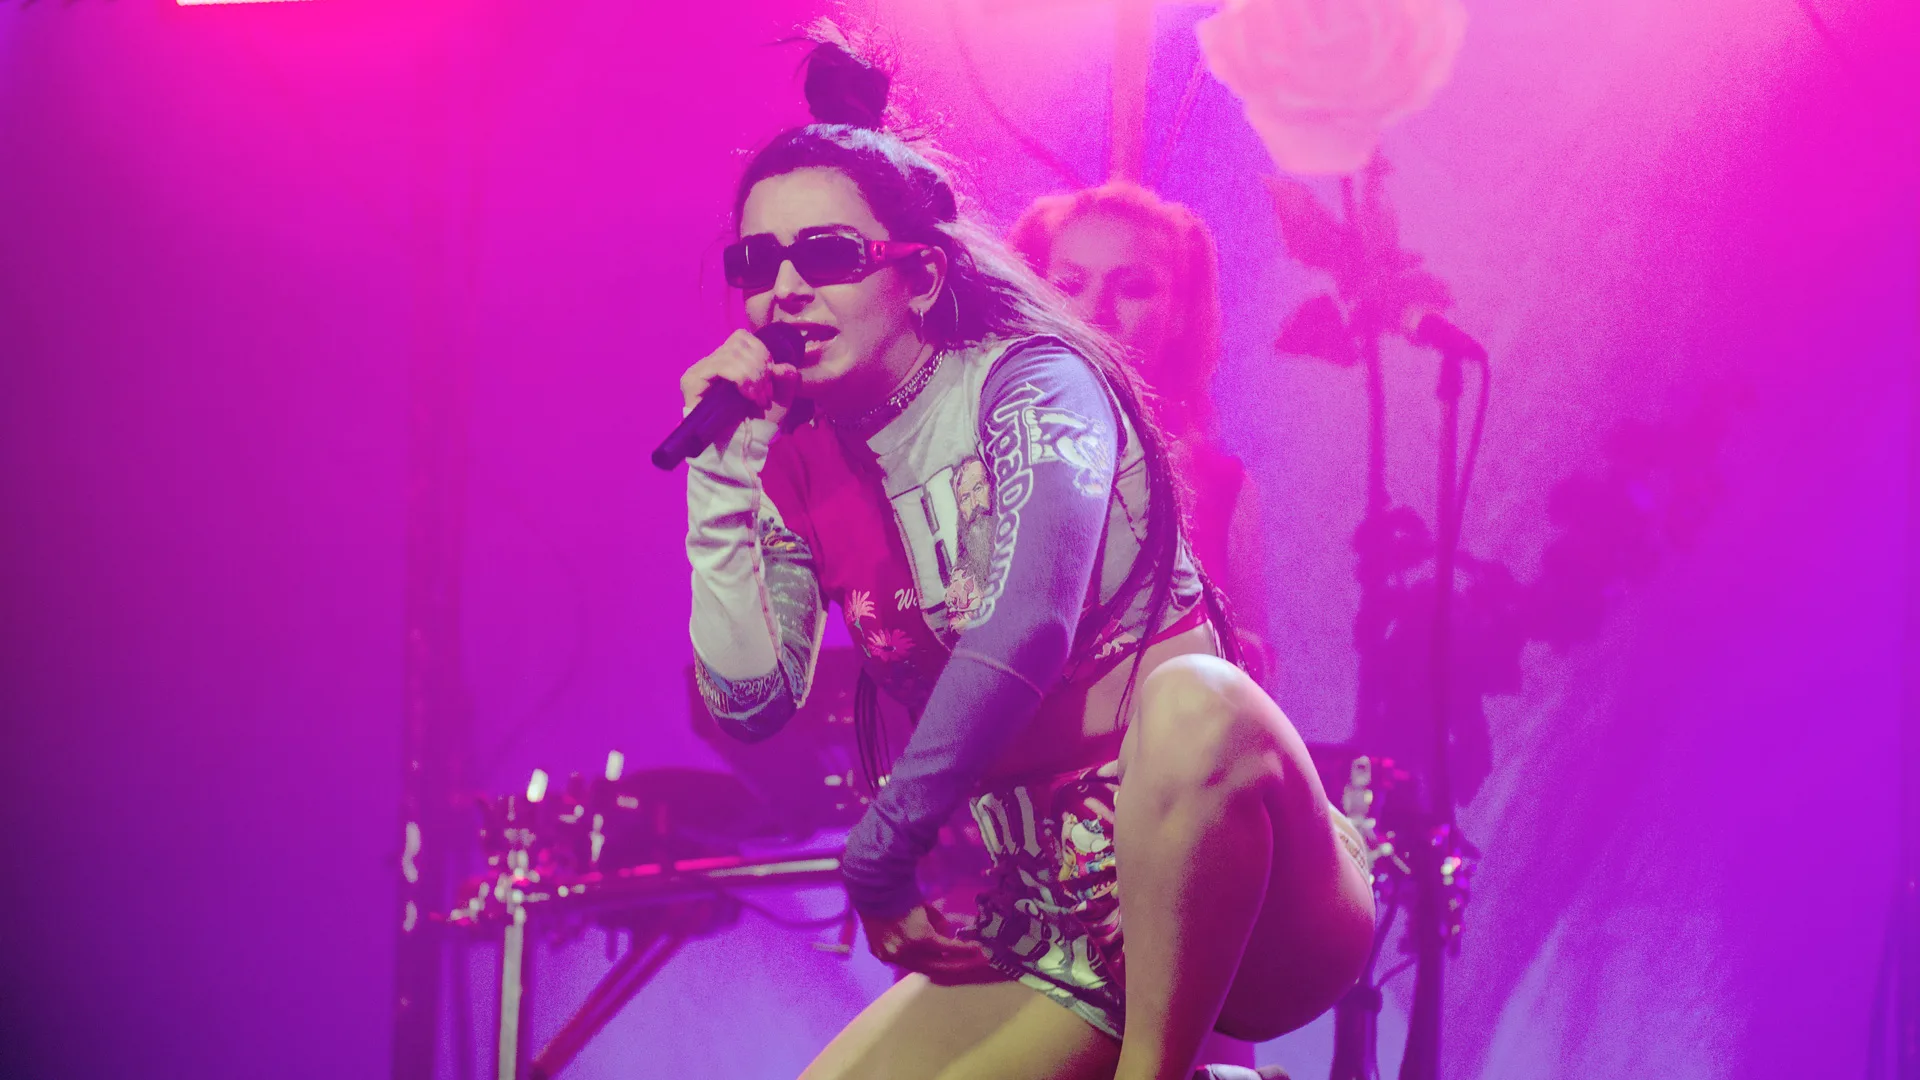 A photograph of the singer Charli Xcx on stage with a mic and sunglasses crouching down against a background of pink lights